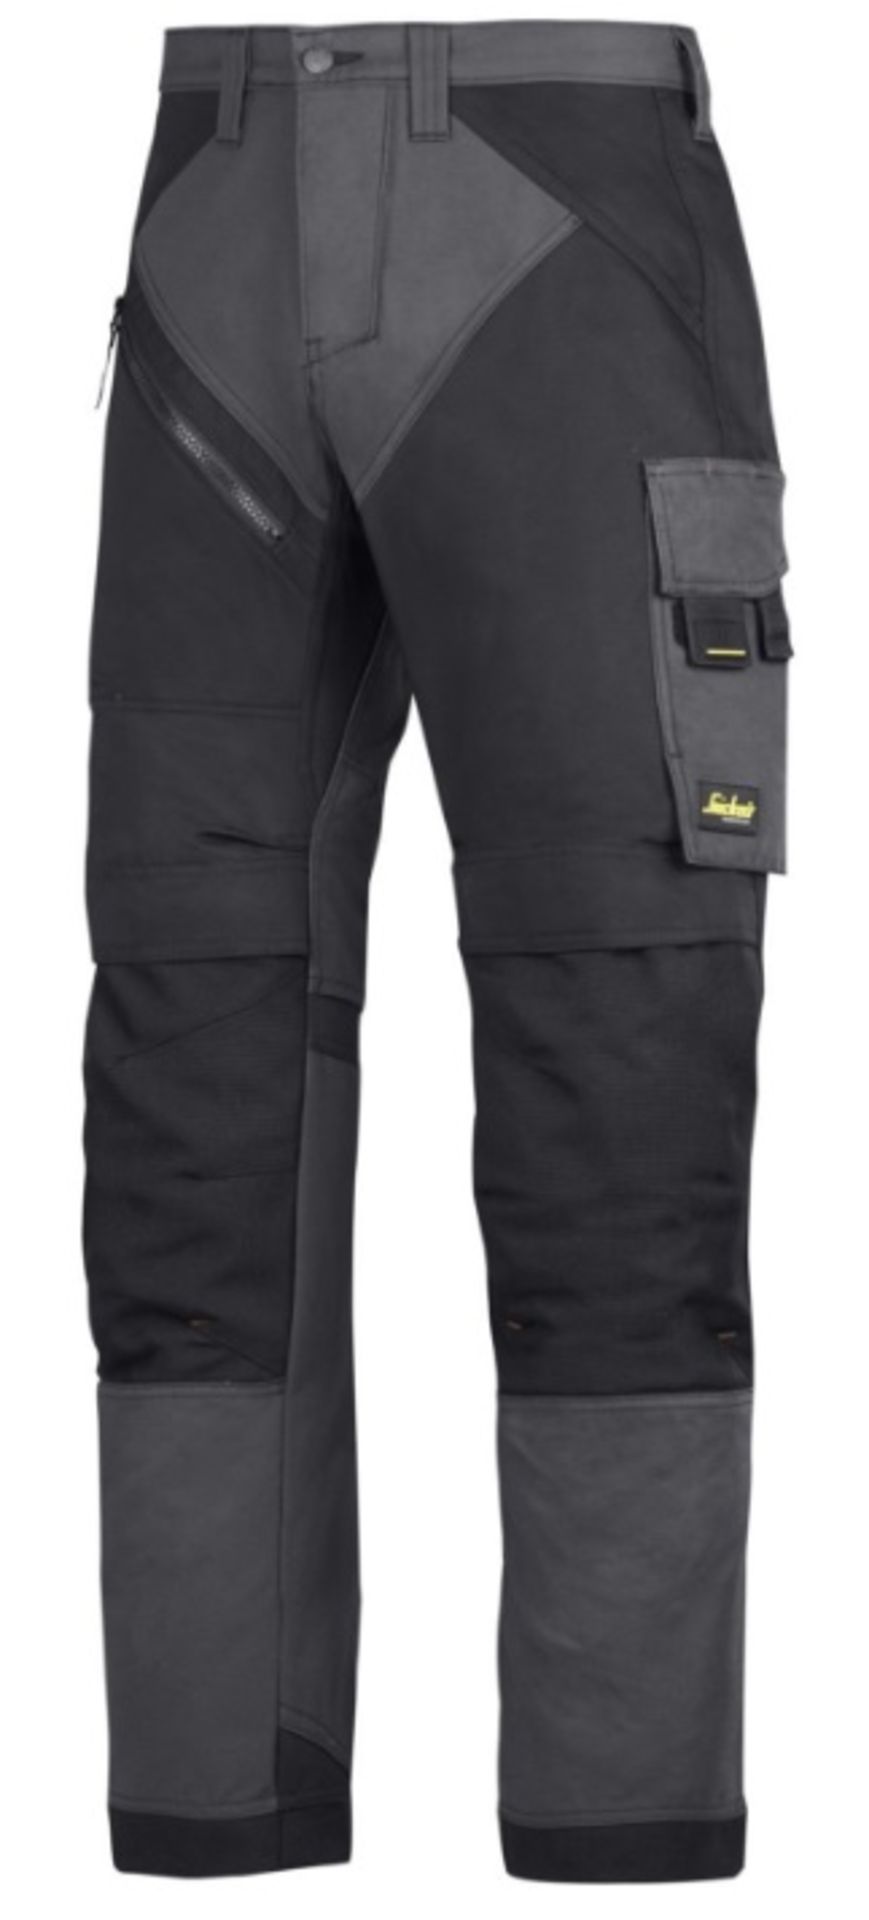 1 x Pair Of SNICKERS 6303 RuffWork Work Trousers - Colour: Grey/Black - Size: 35" W / 32" L - New/